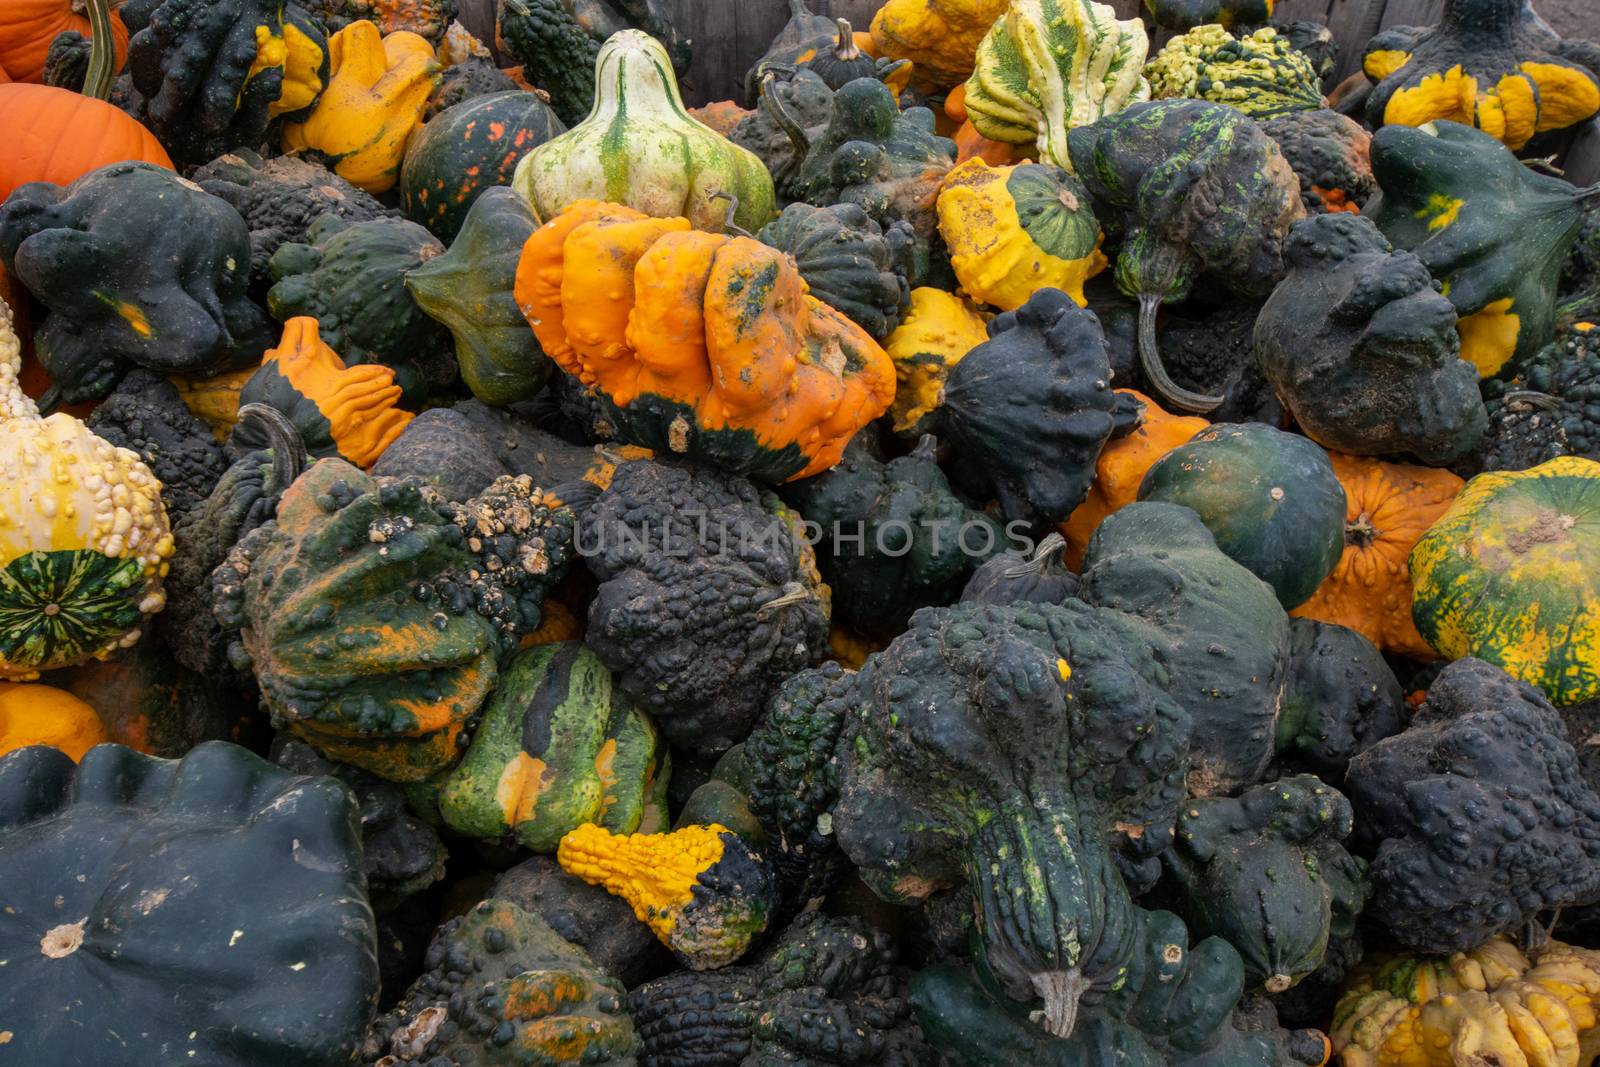 A Pile of Ugly Pumpkins and Squash in Different Colors in a Wooden Crate in a Farmer's Market Filling the Frame